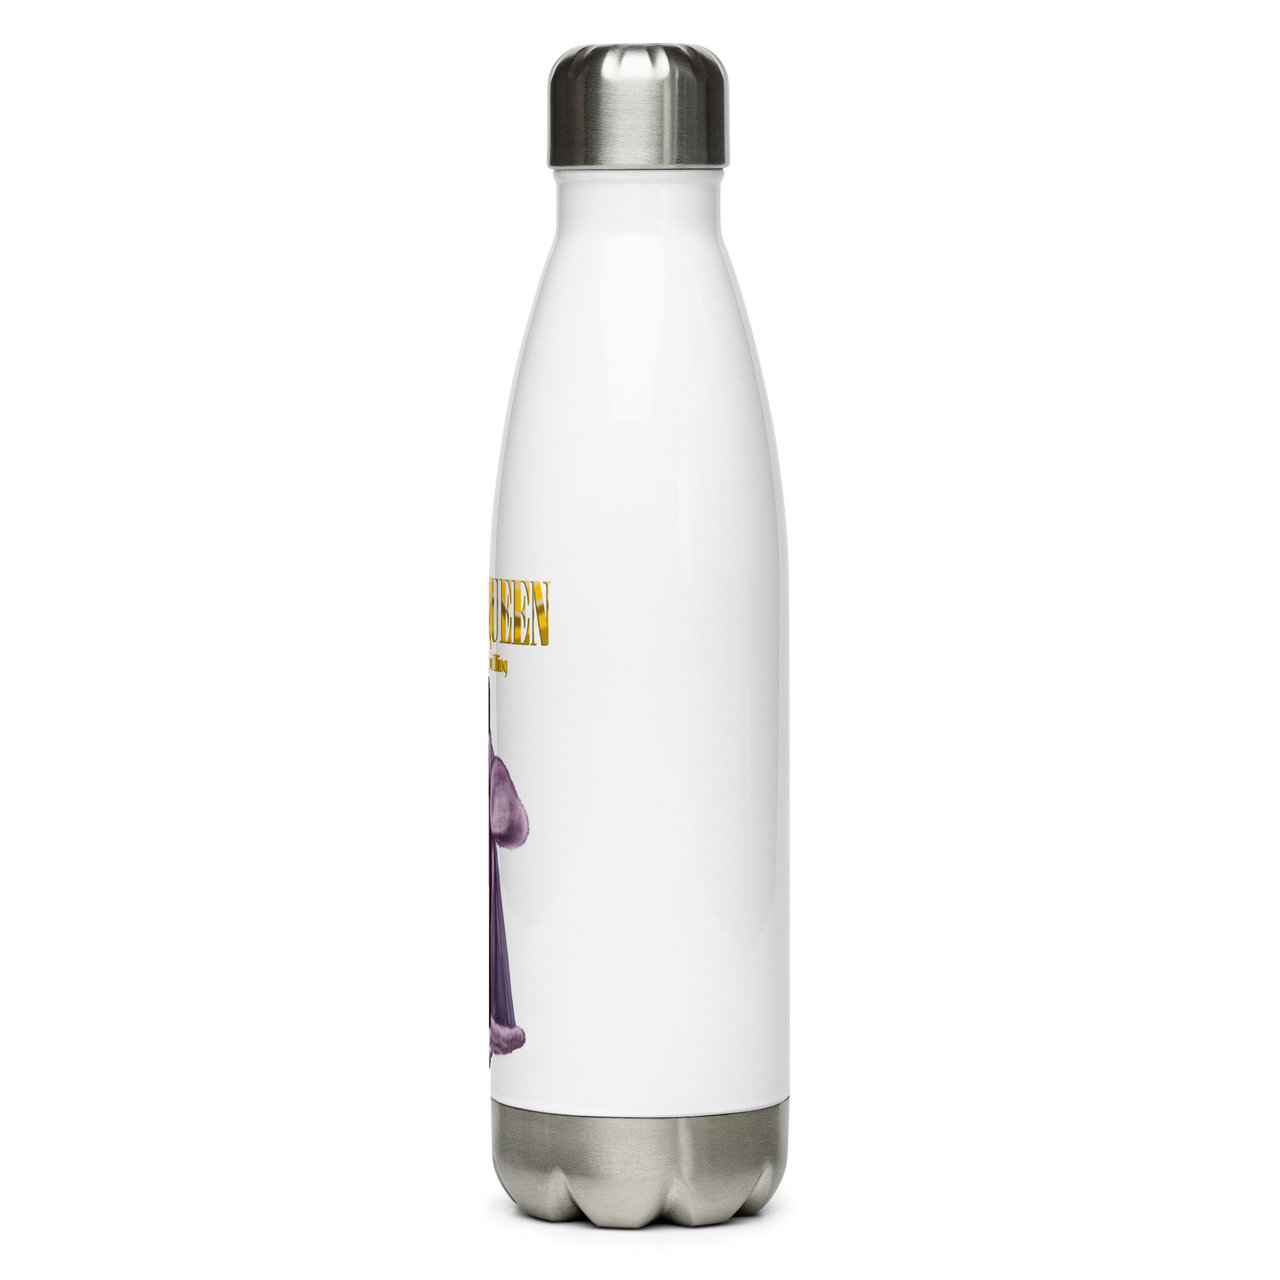 VCC /Stainless Steel Water Bottle/I am a Queen SHAVA